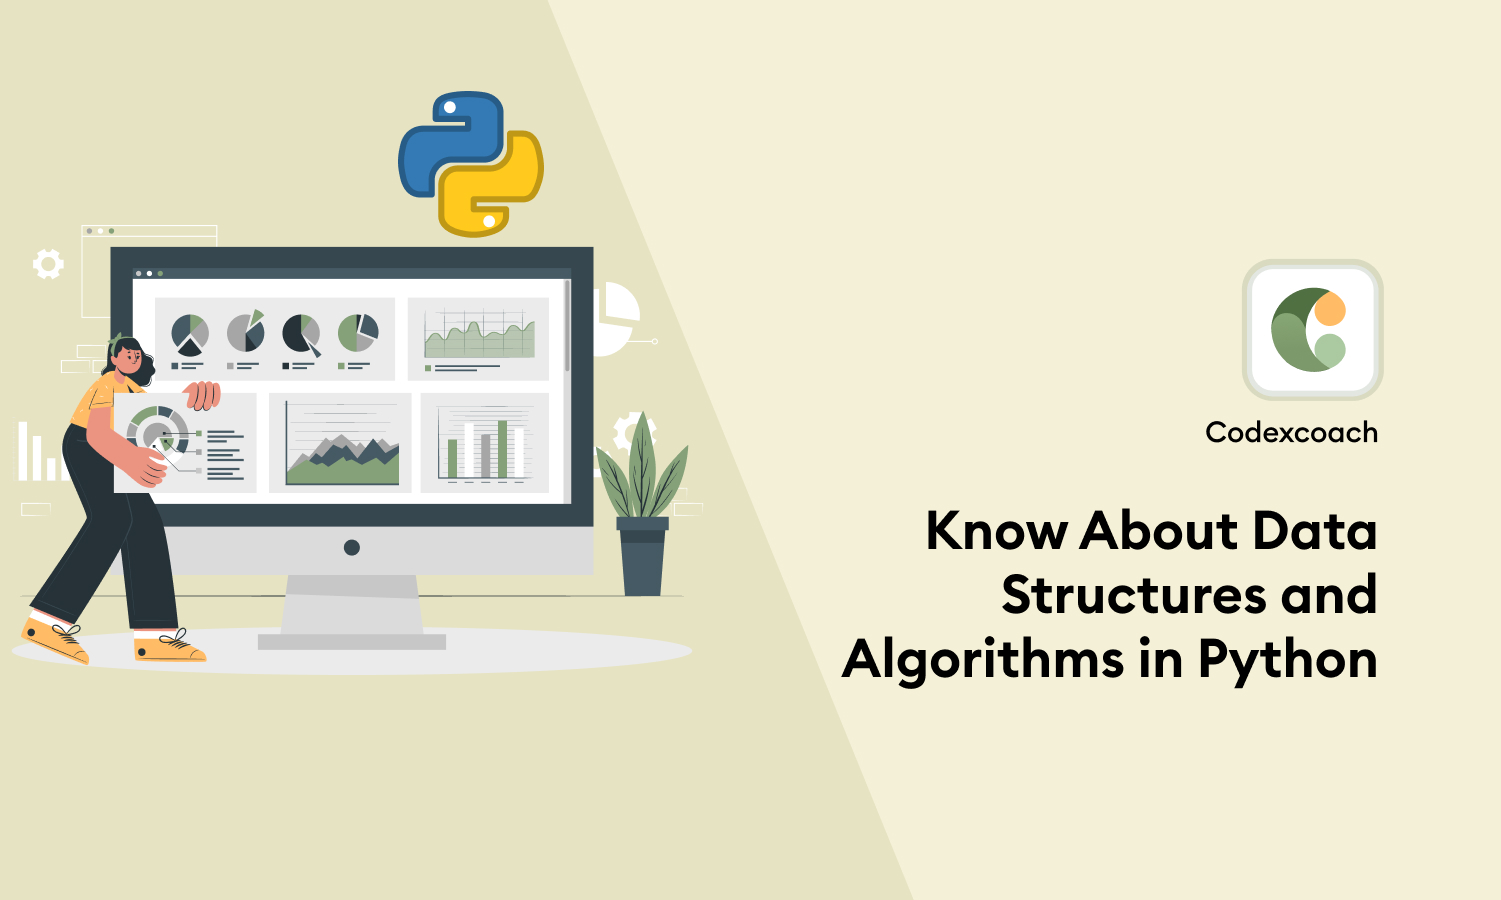 Know About Data Structures and Algorithms in Python